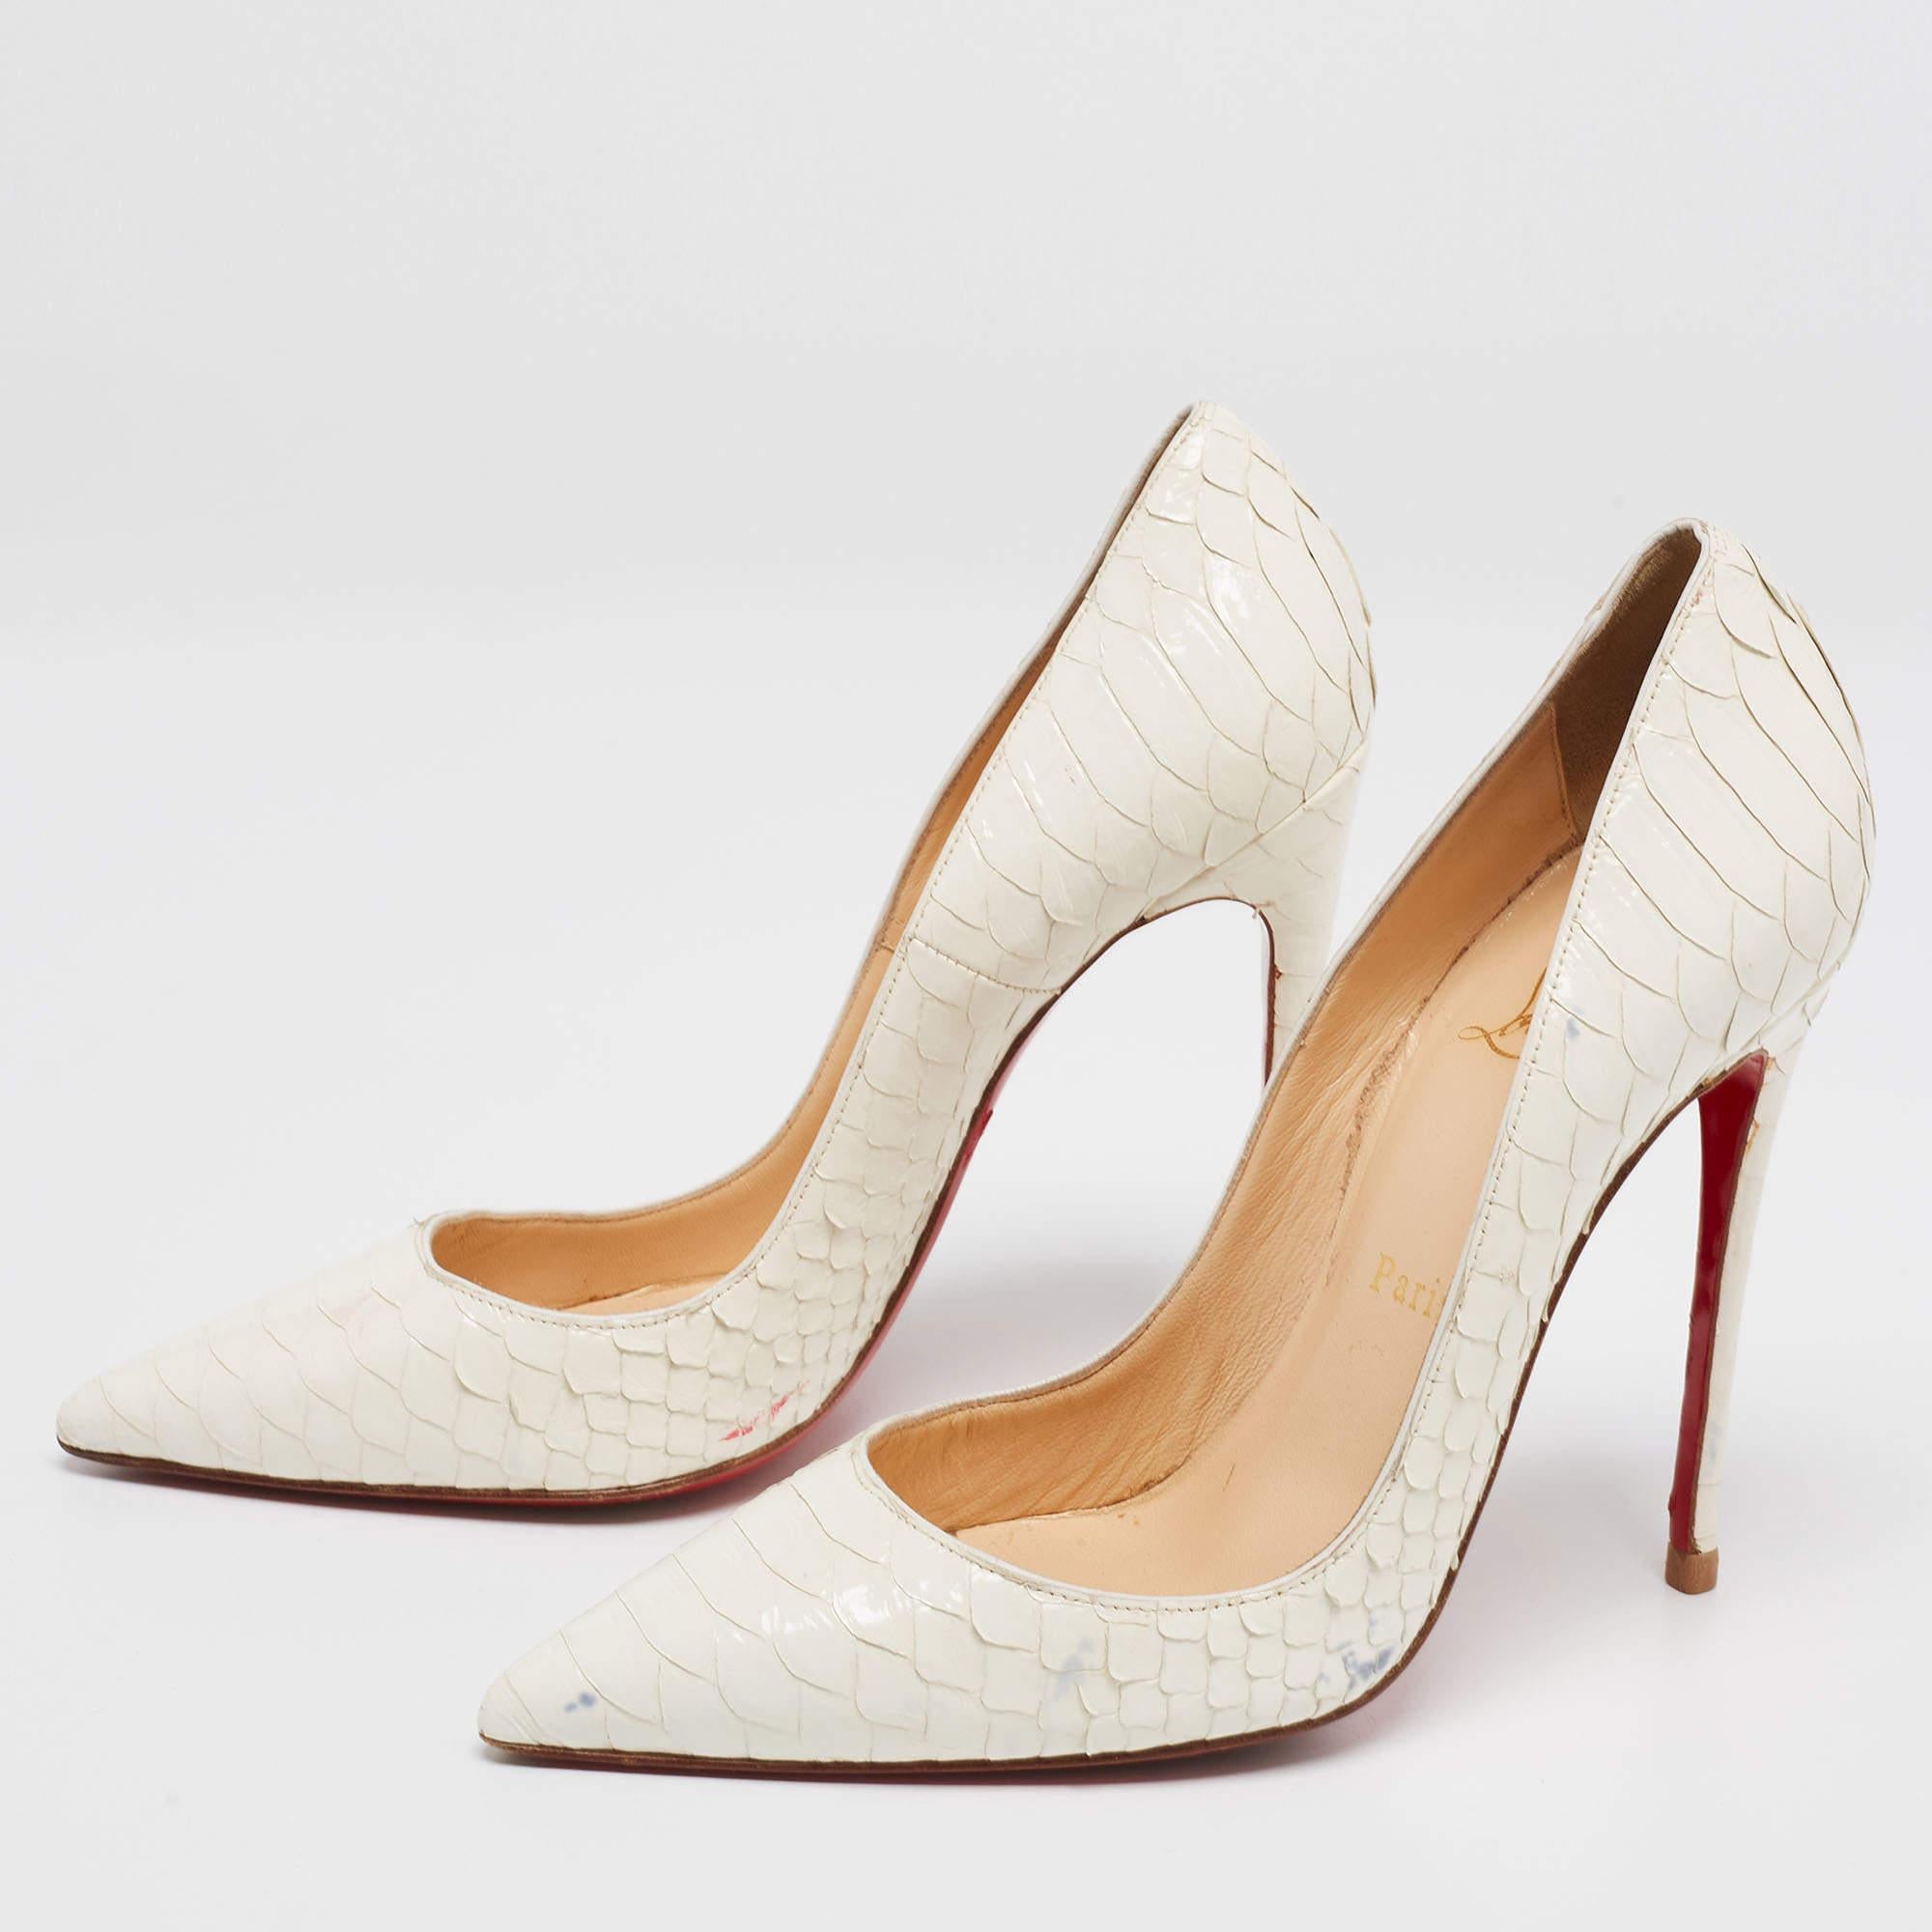 These So Kate pumps from Christian Louboutin are iconic and brilliantly created. They were designed with selective features that inherited the brand's signature skill and legacy effortlessly. Made using white python patent leather into a